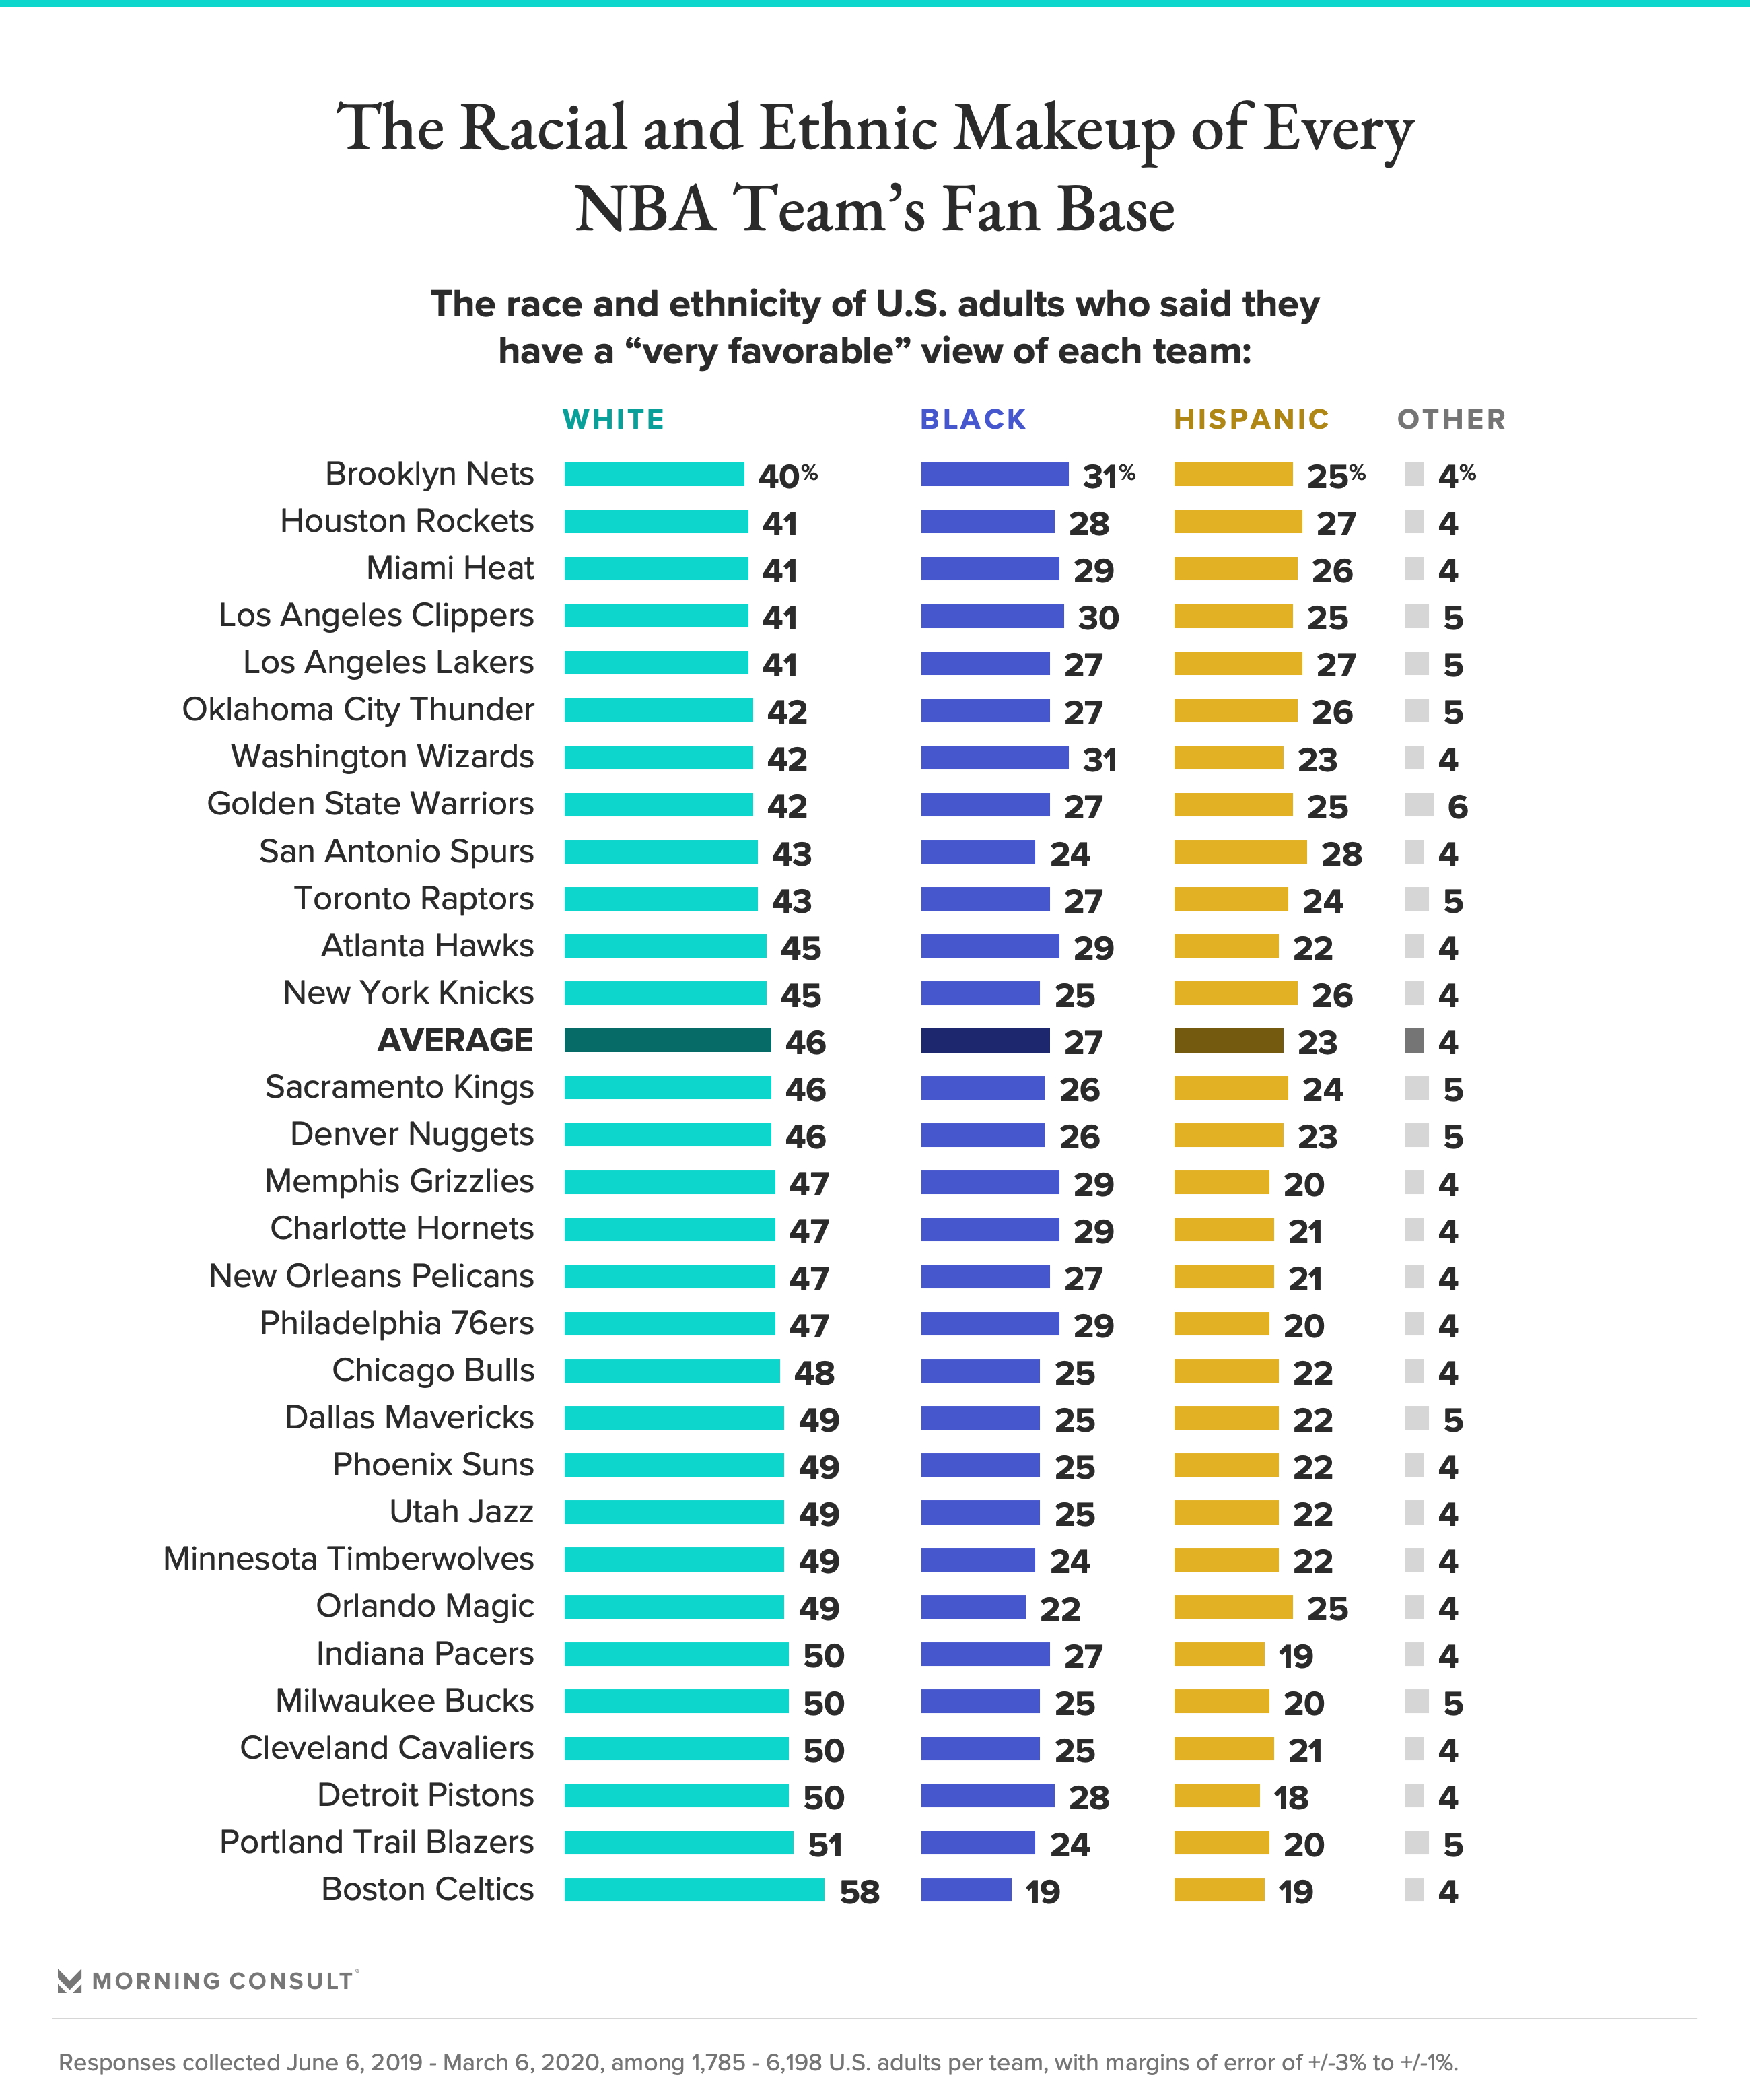 Chart with racial and ethnic makeup of NBA fans